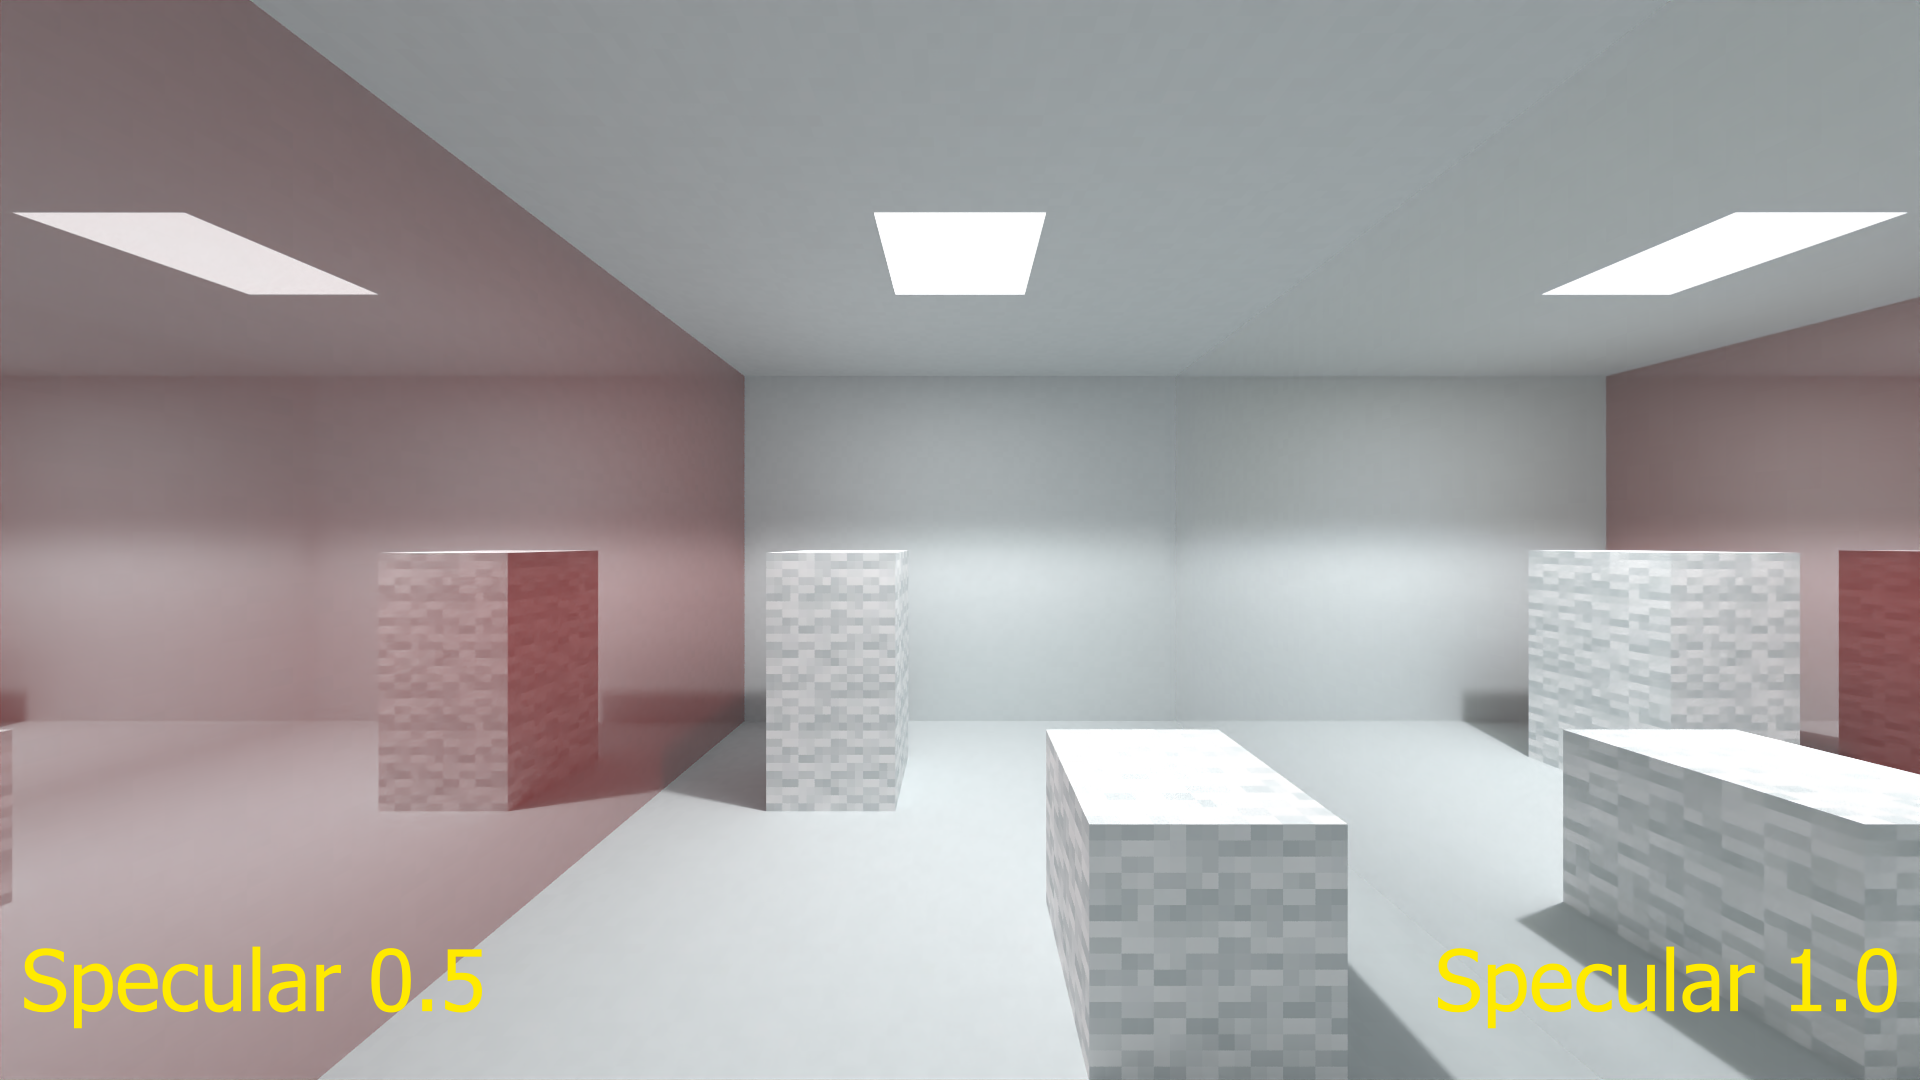 Comparison of different Specular levels